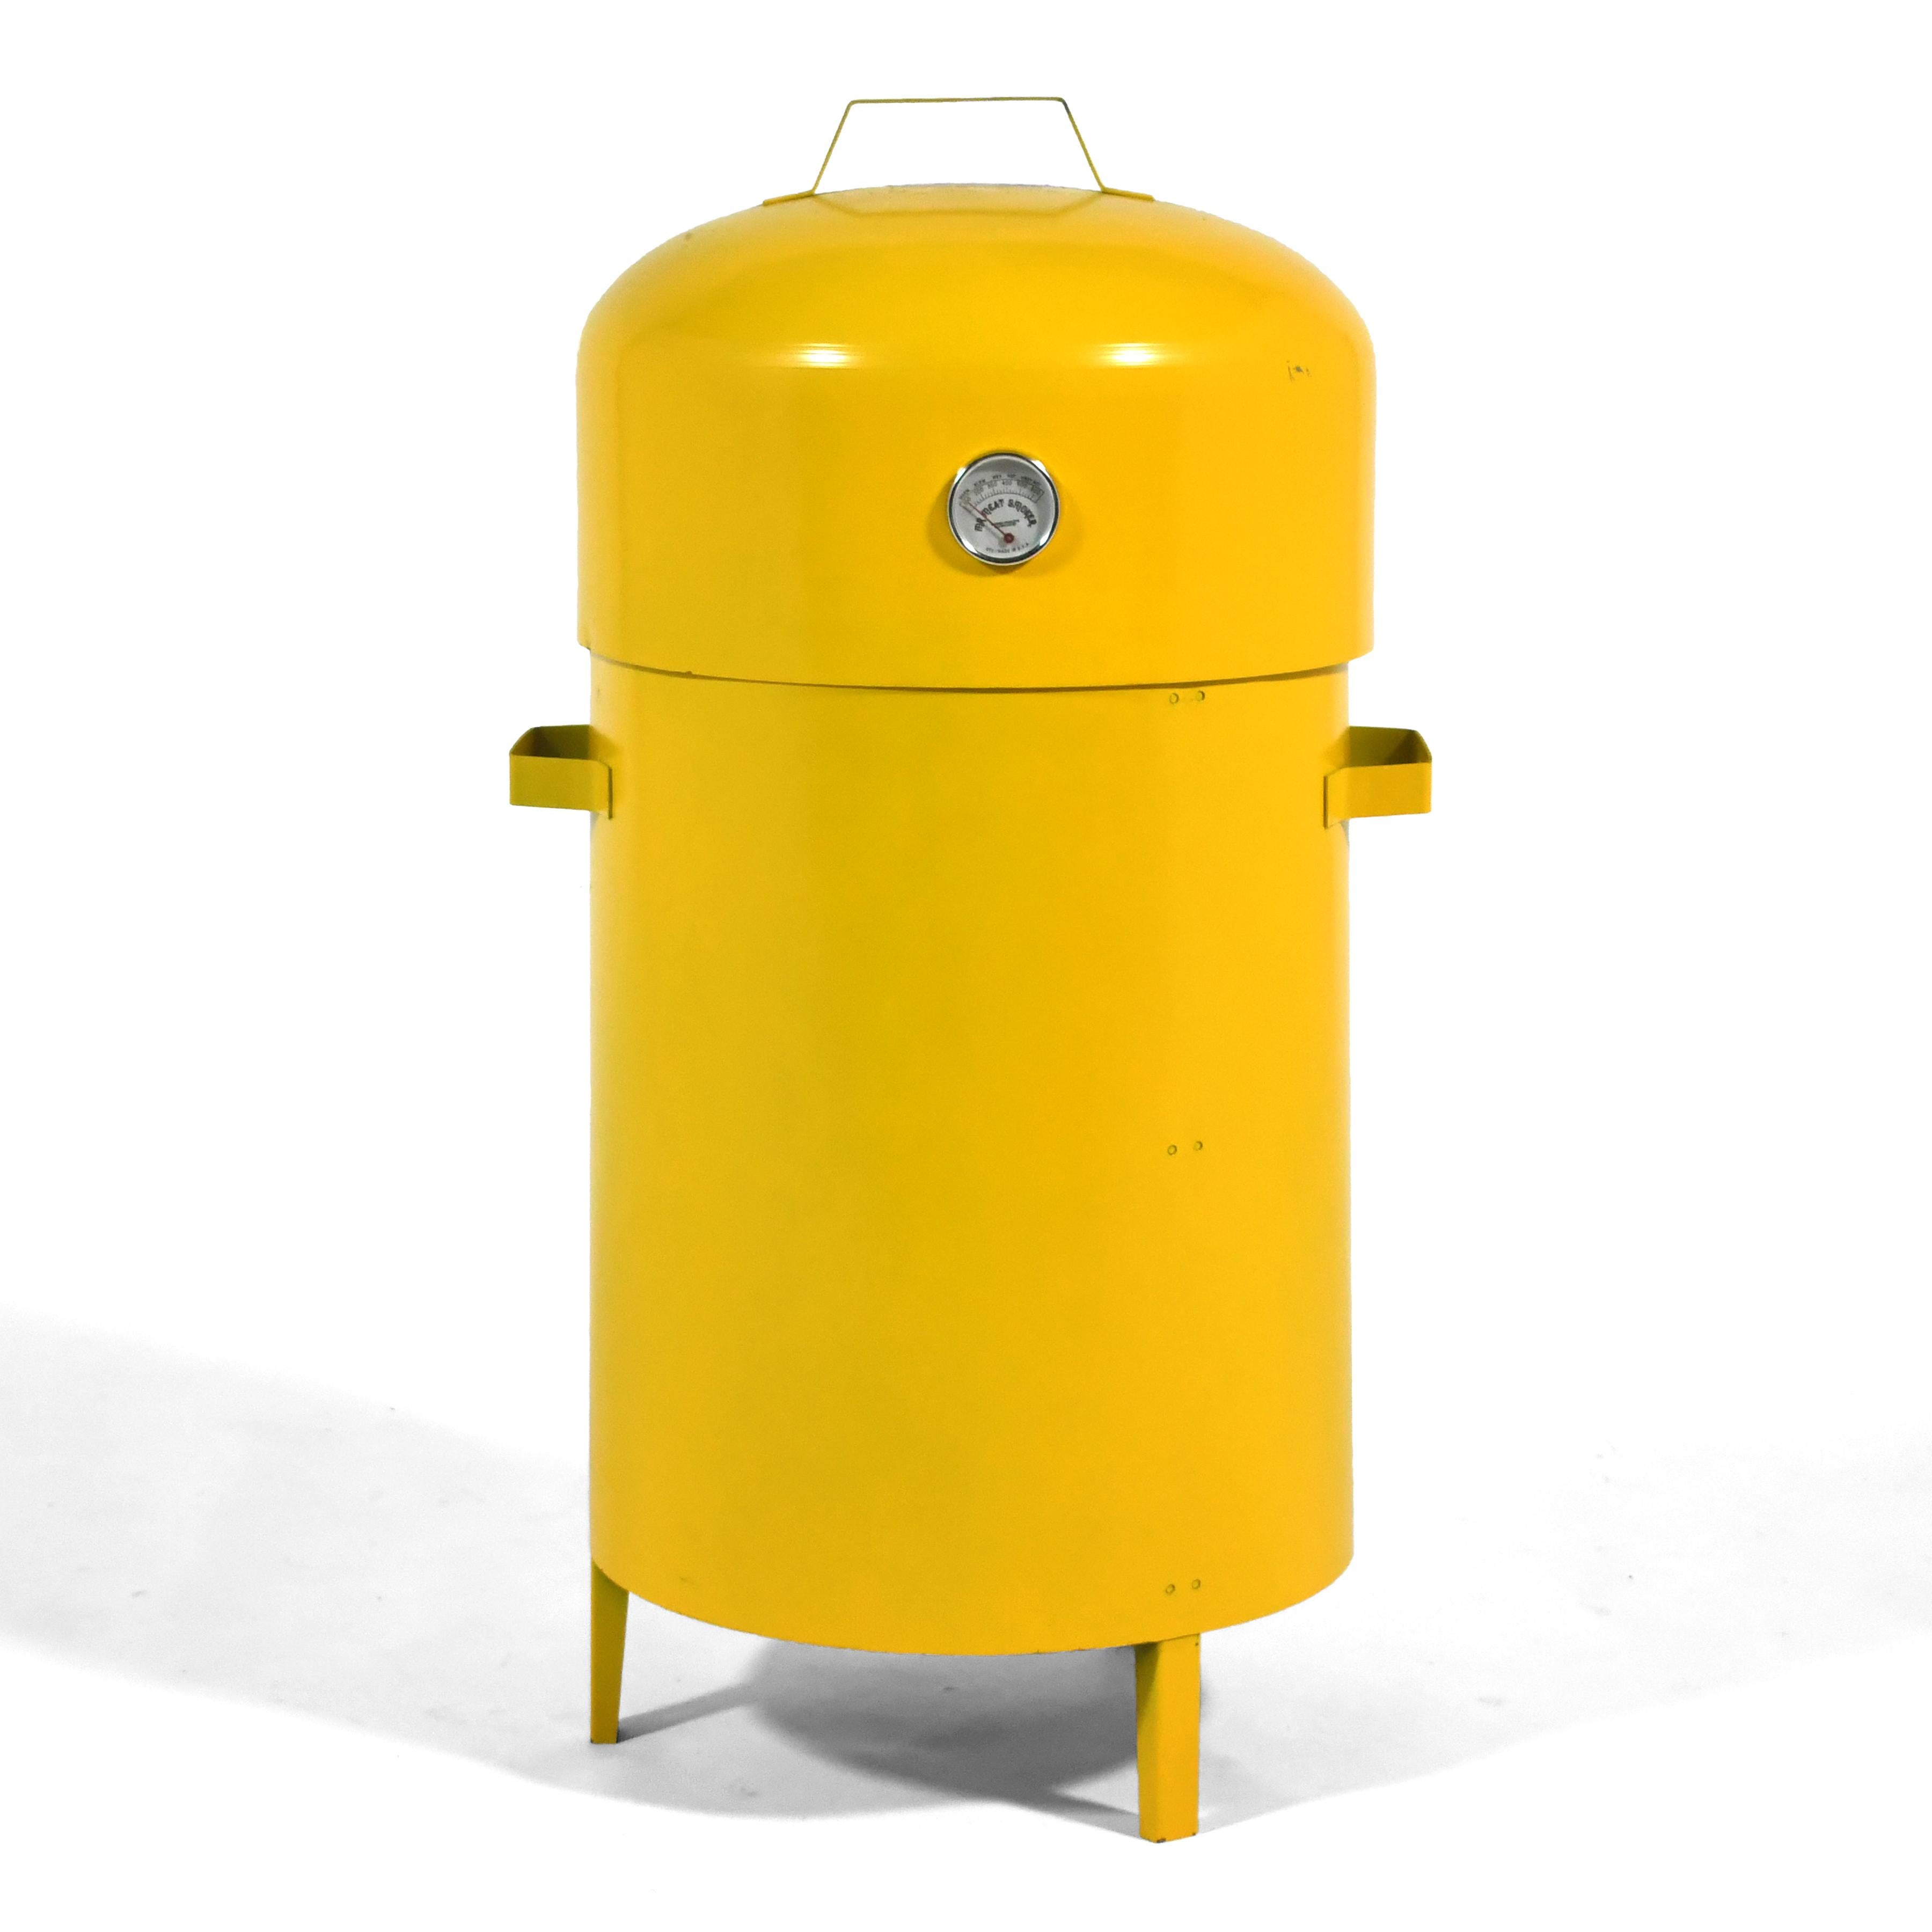 Plated Yellow Mr. Meat Smoker Barbecue Grill / Cooker M.I.B. For Sale